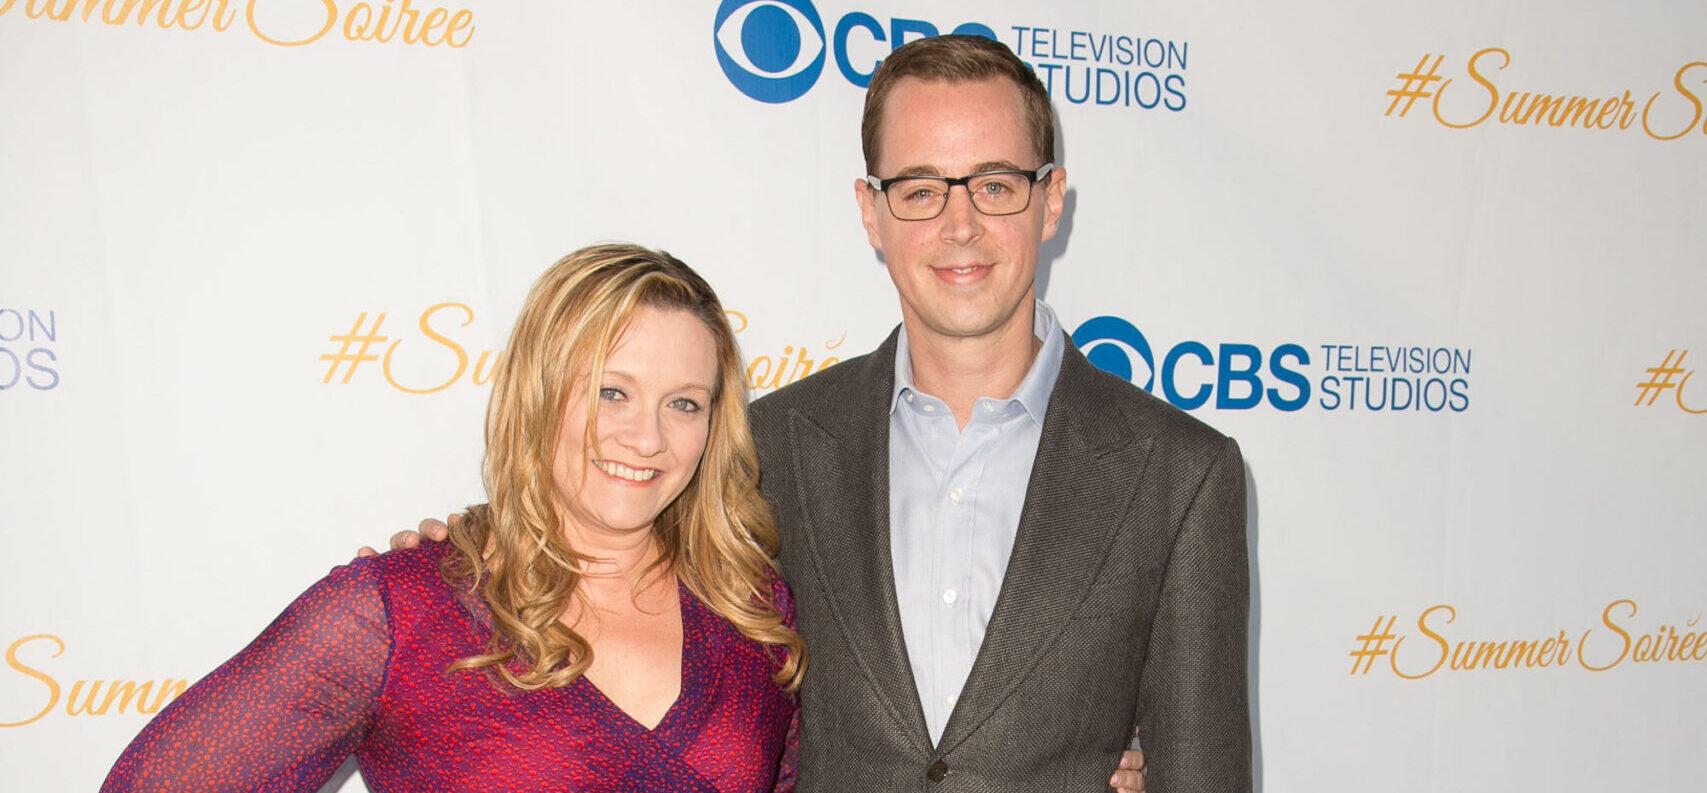 'NCIS' Star Sean Murray's Wife Files For Divorce After 19 Years Together